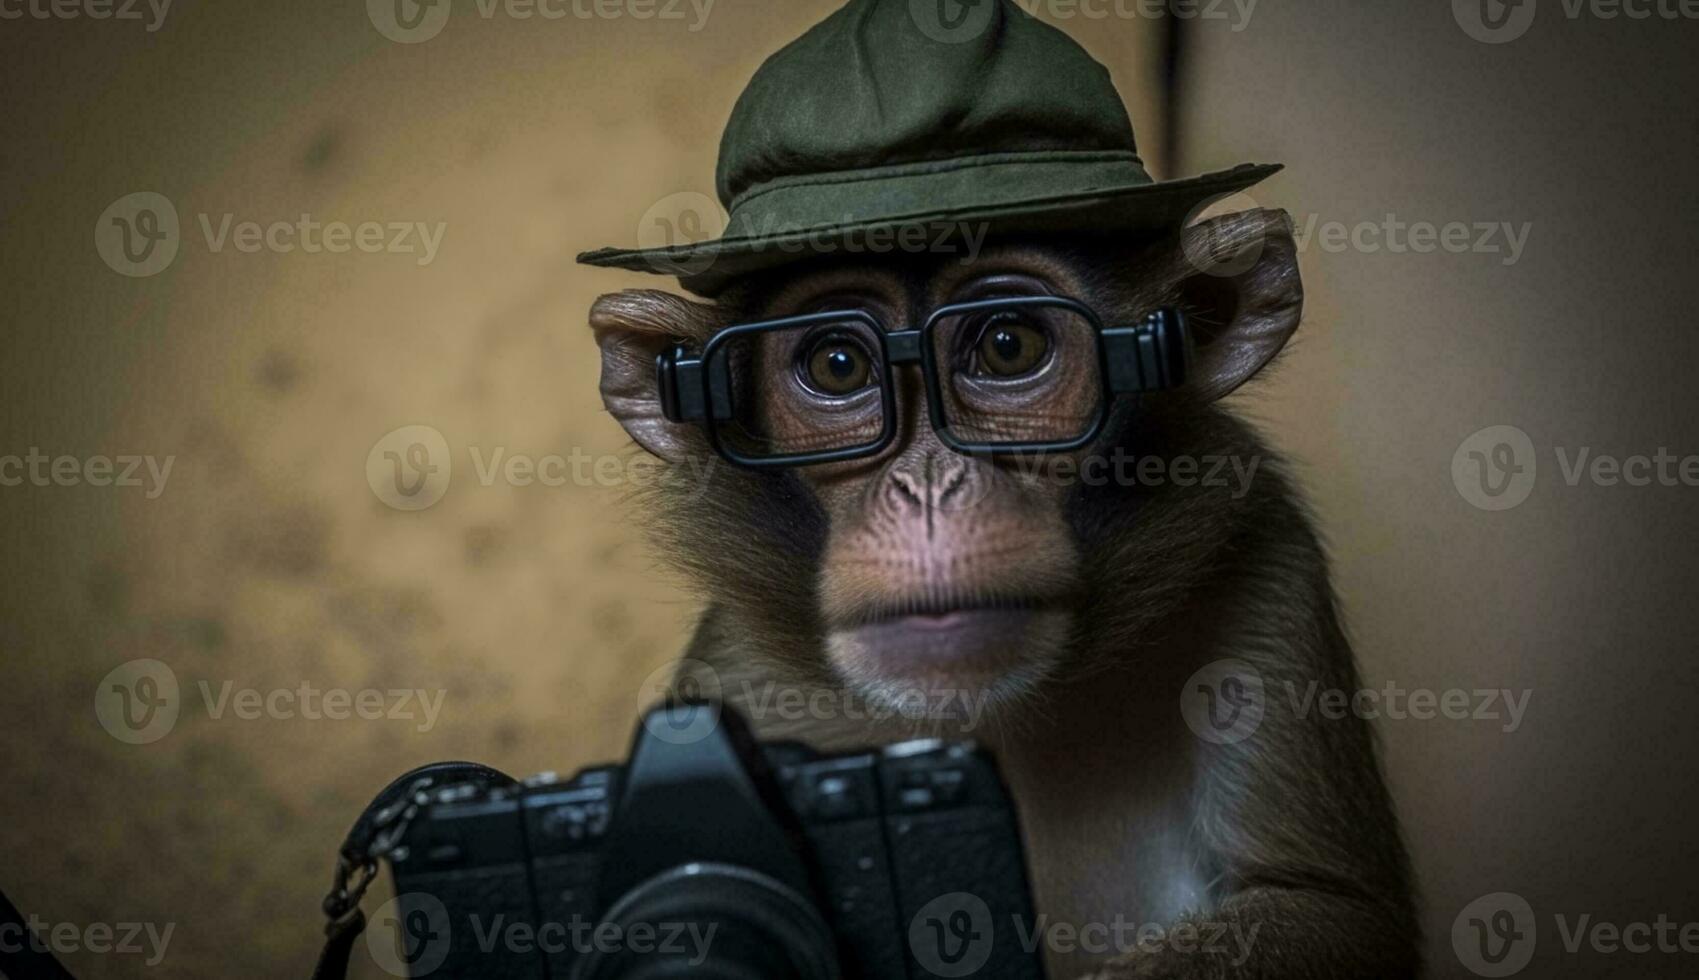 Monkey wearing glasses holding a camera poses for a photo, photo